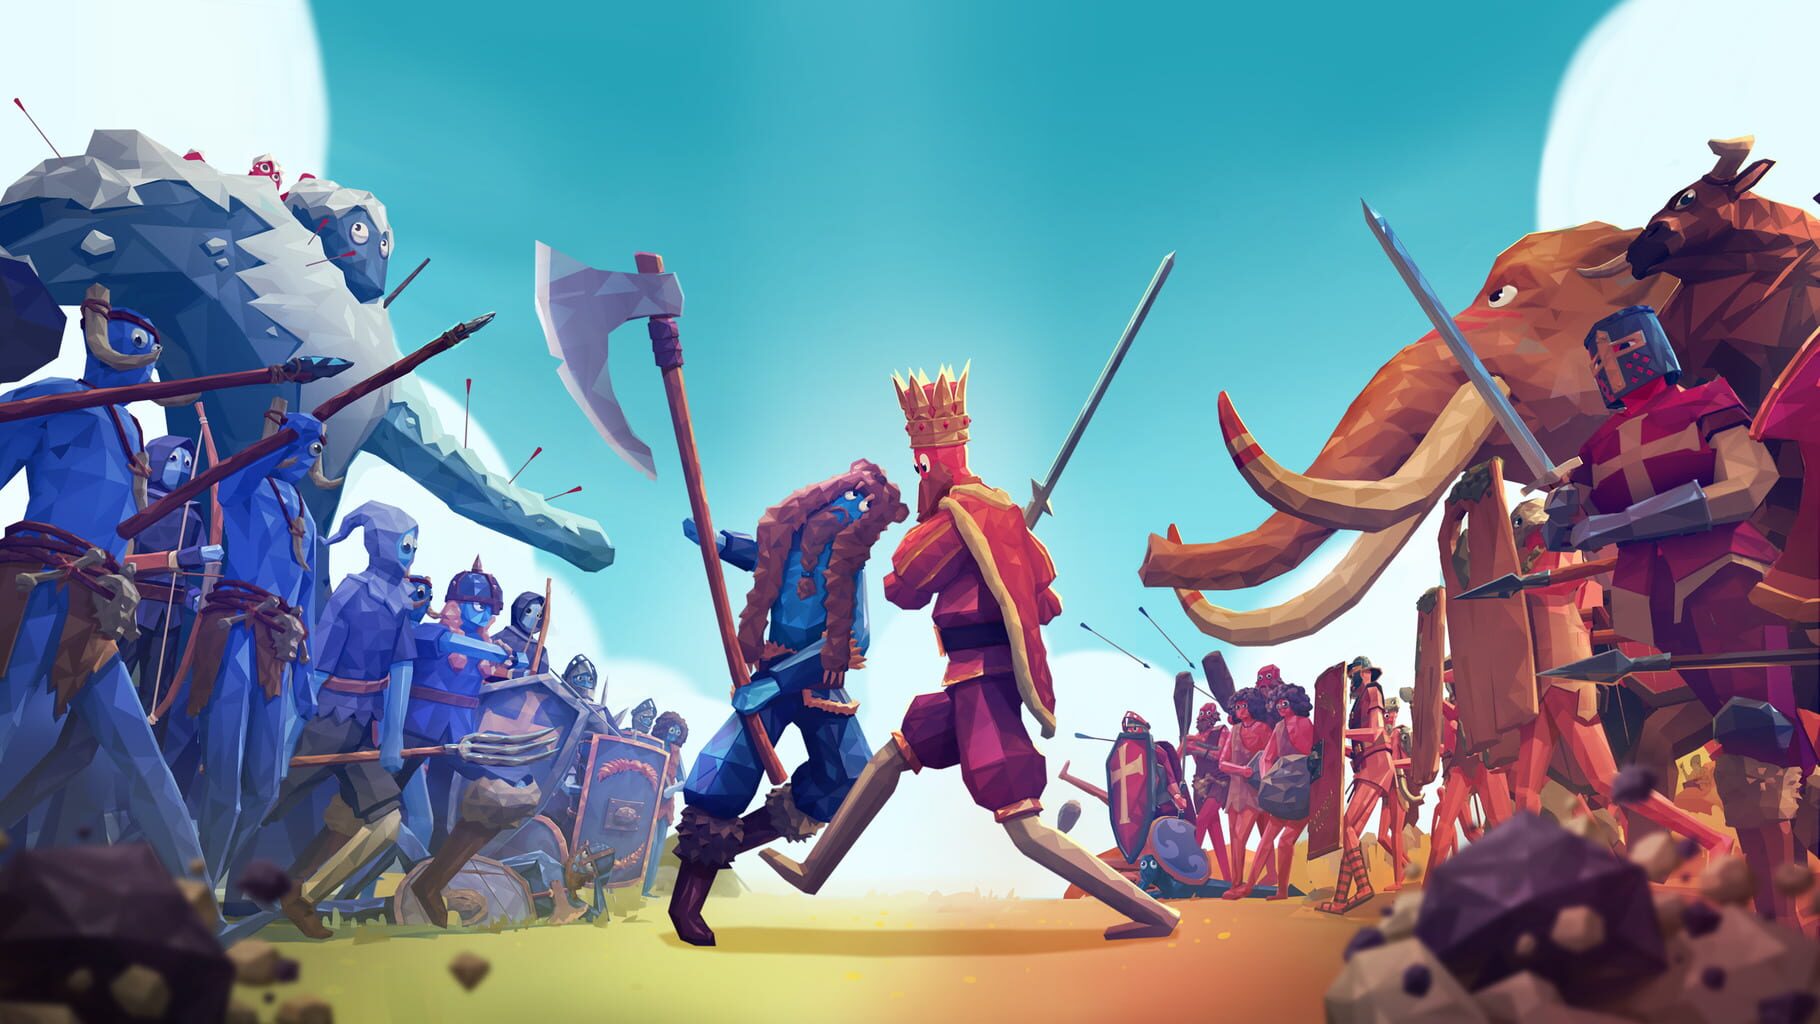 Totally Accurate Battle Simulator Image